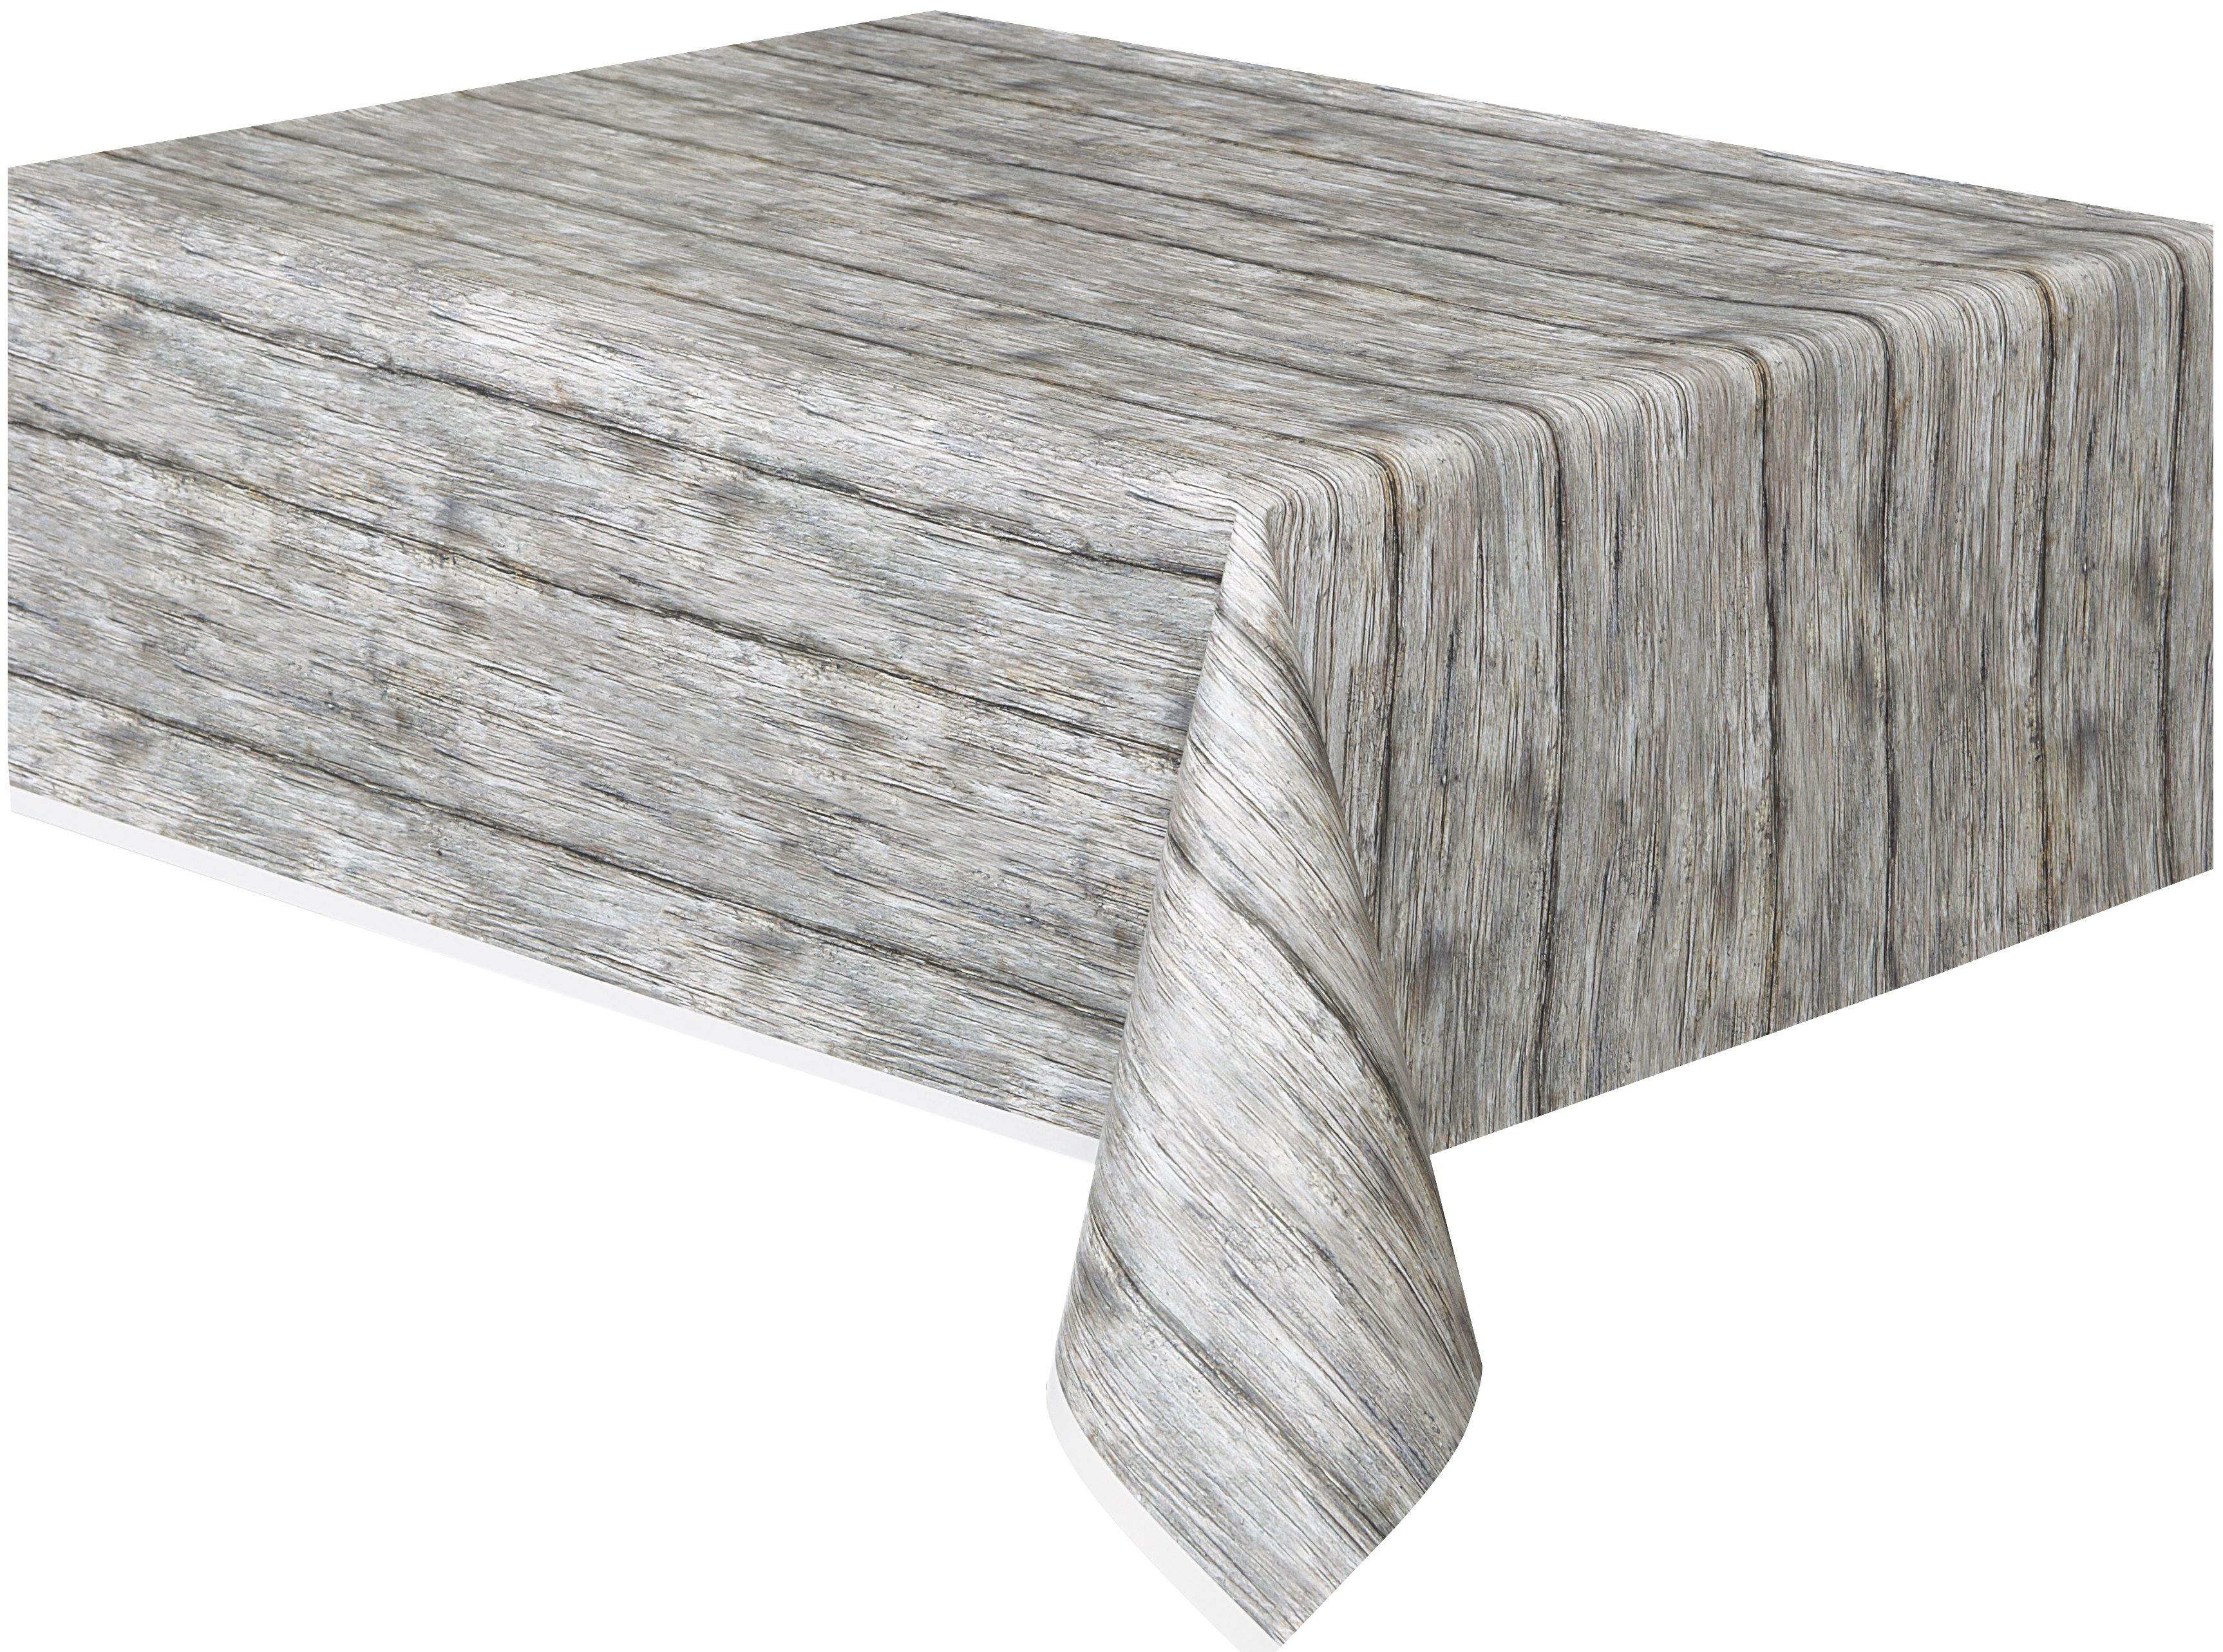 Rustic Wood Plastic Rectangle Tablecover - 137cm x 274cm - The Base Warehouse